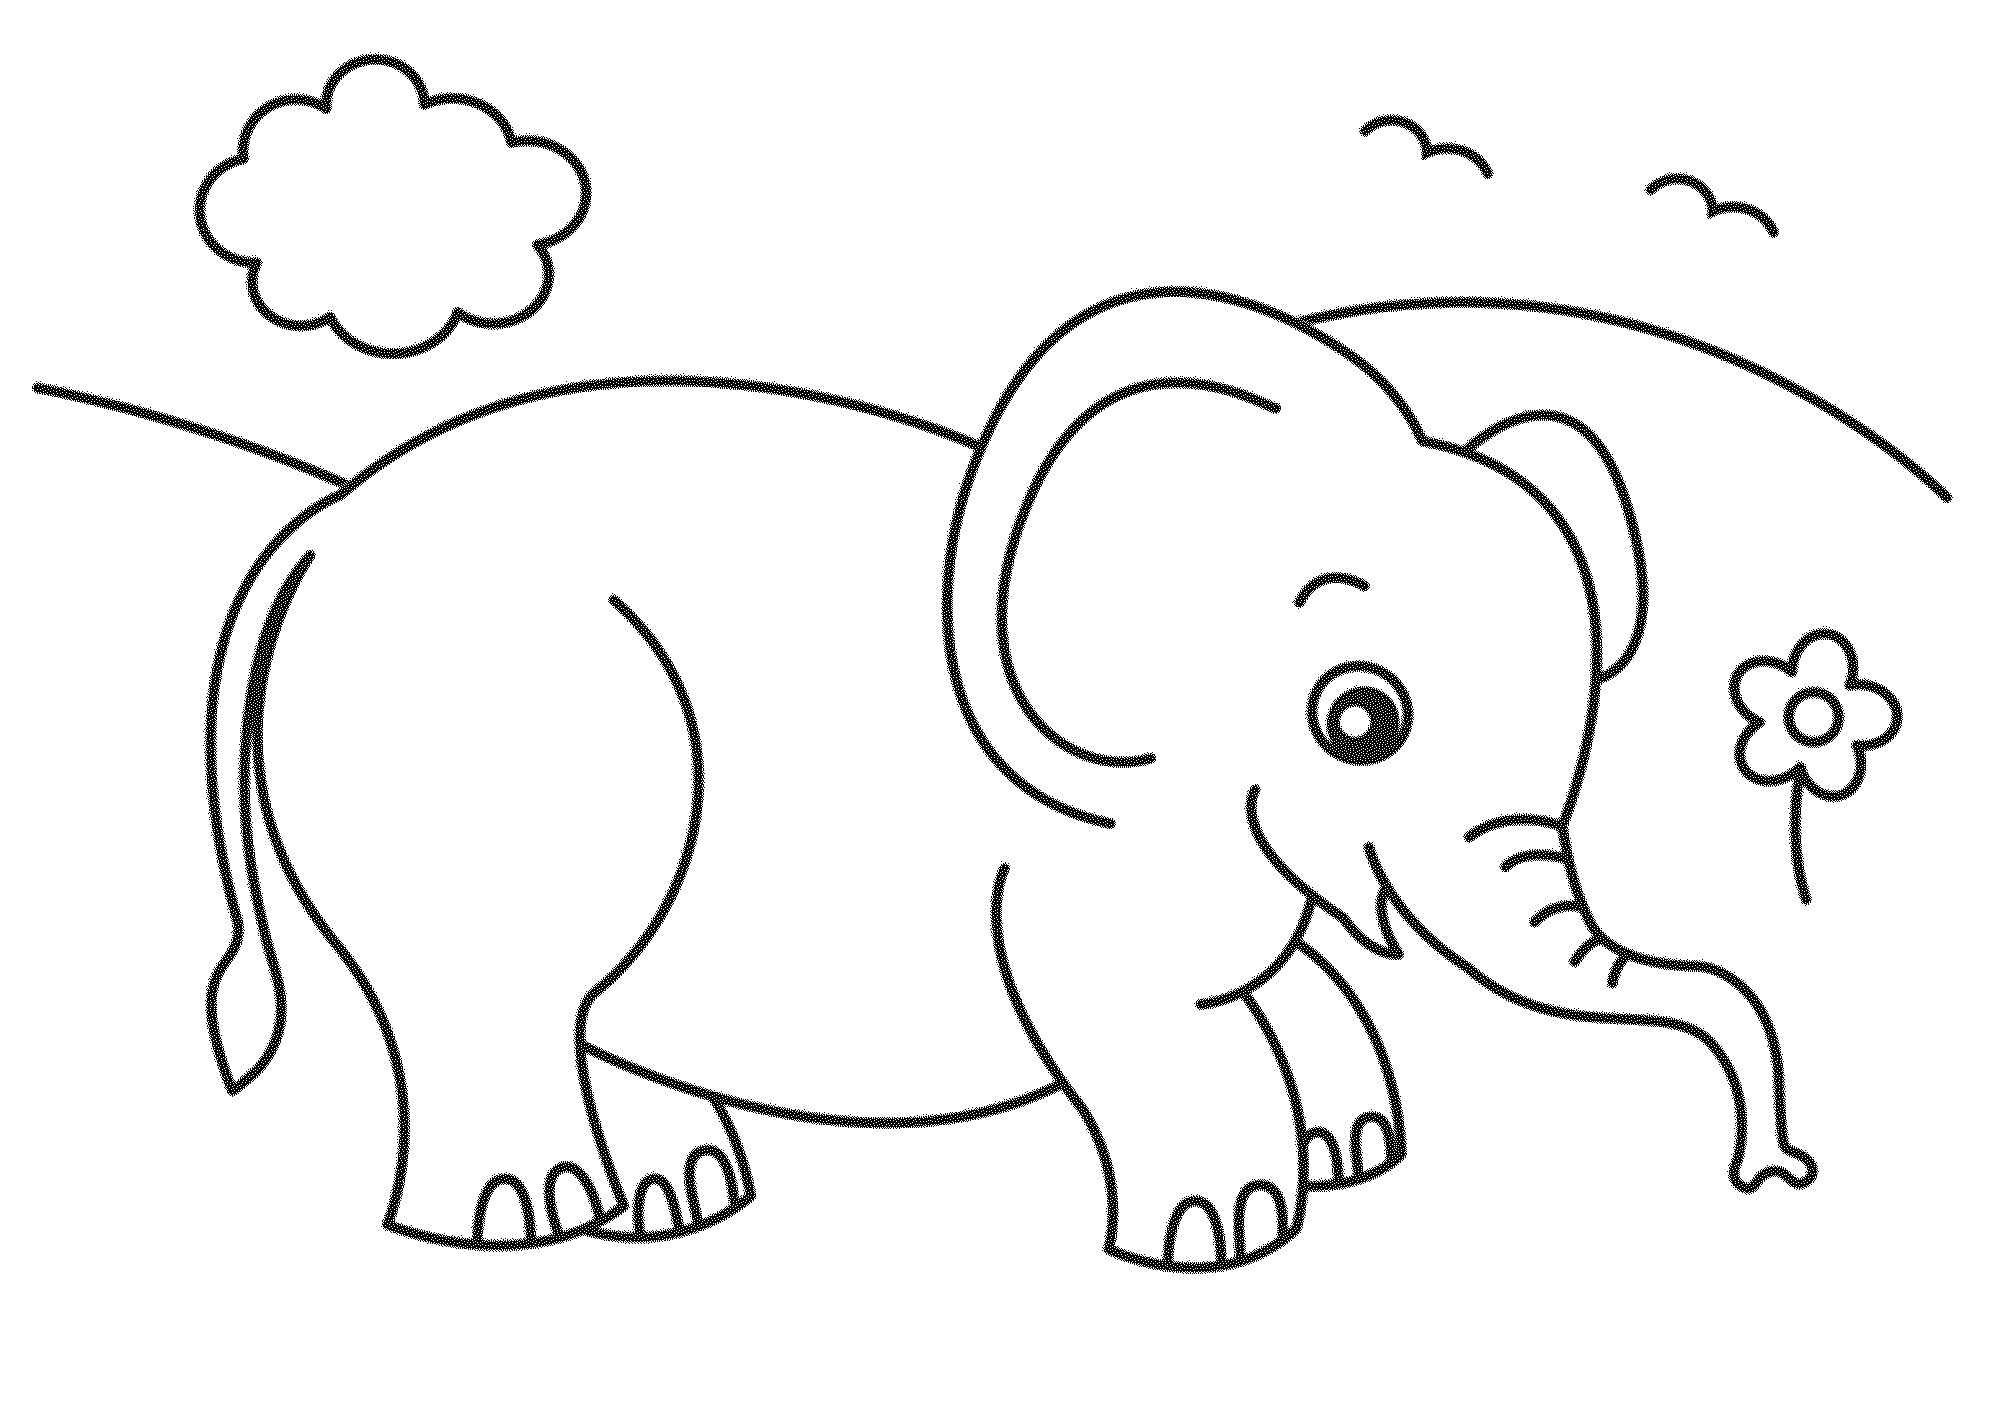 Baby Elephant Coloring Page
 Print & Download Teaching Kids through Elephant Coloring